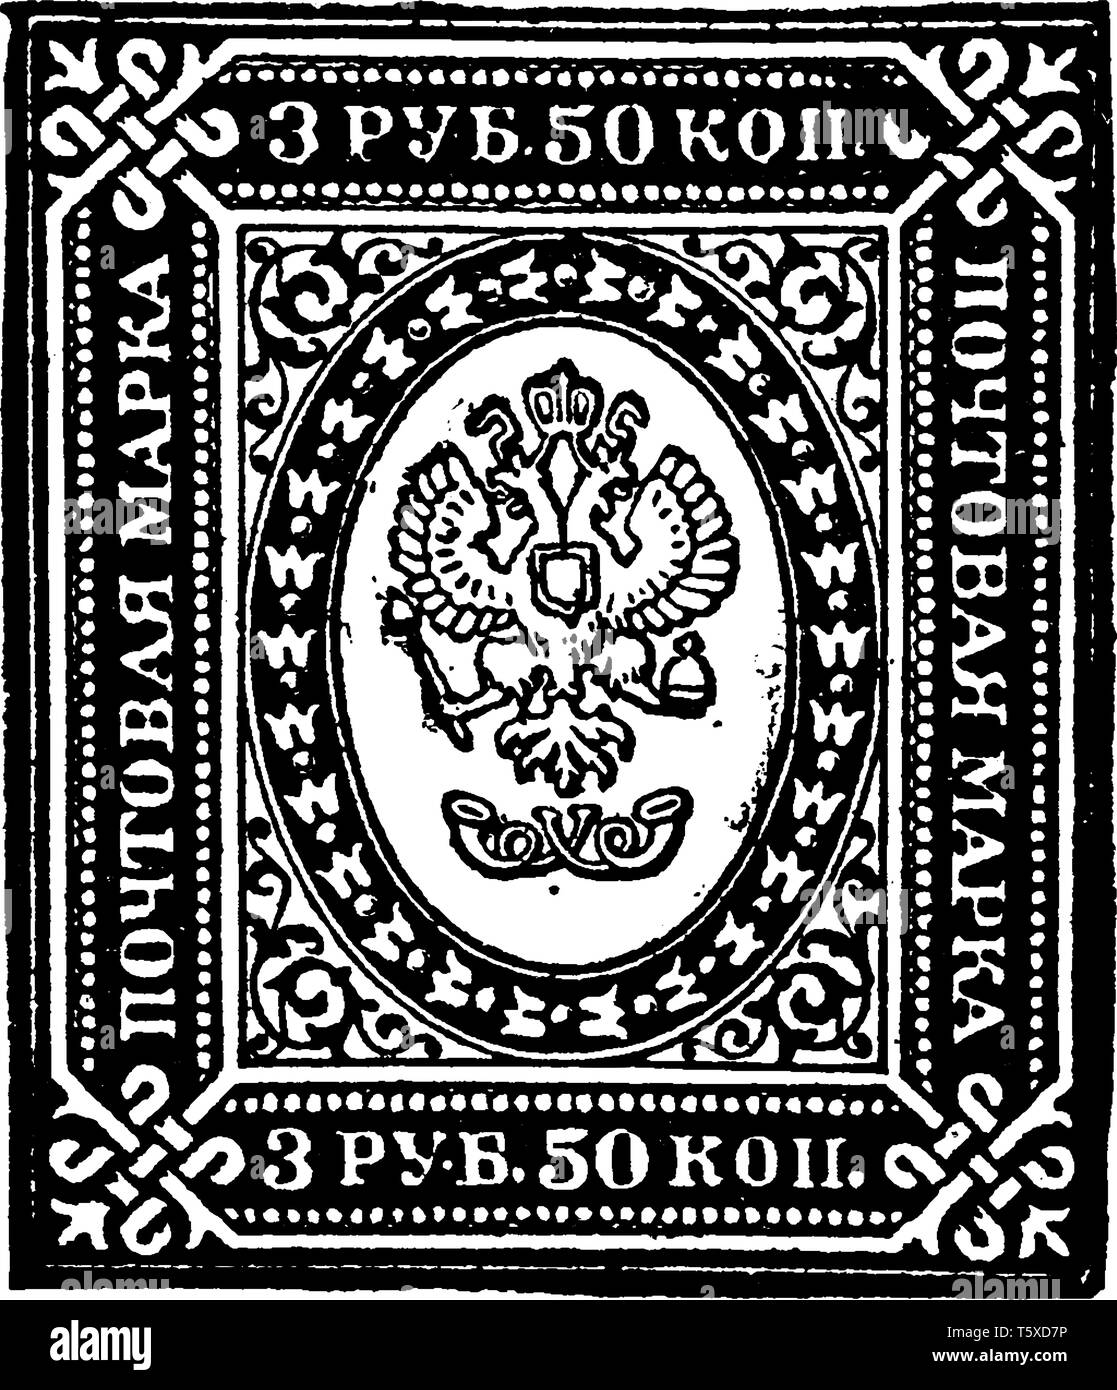 This image represents Russia 3 Ruble 50 Kopec Stamp in 1884, vintage line drawing or engraving illustration. Stock Vector